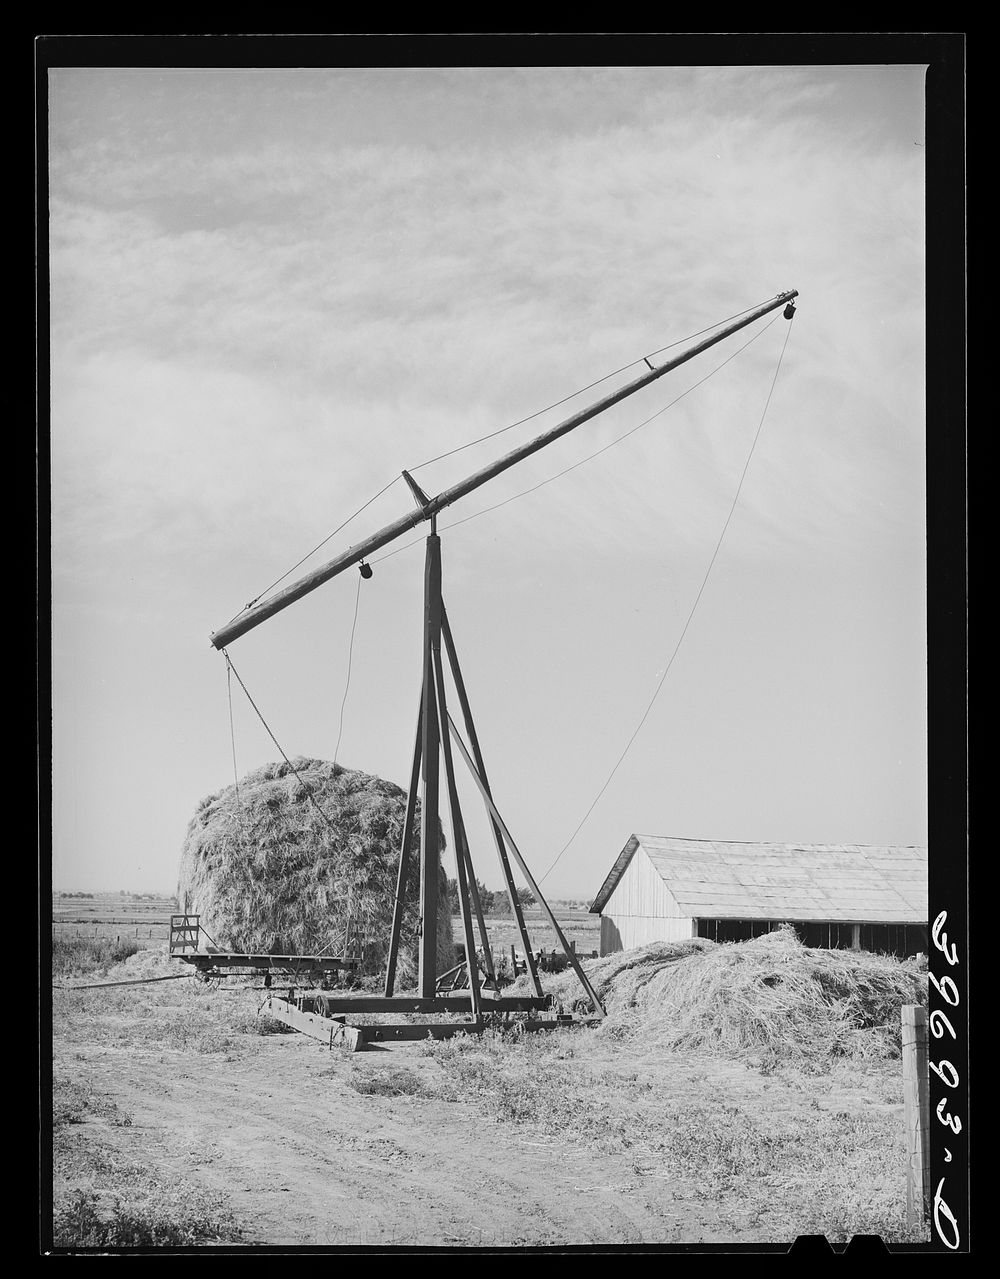 Hay stacker and hay stack on farm of member of the Dairymen's Cooperative Creamery. Caldwell, Canyon County, Idaho by…